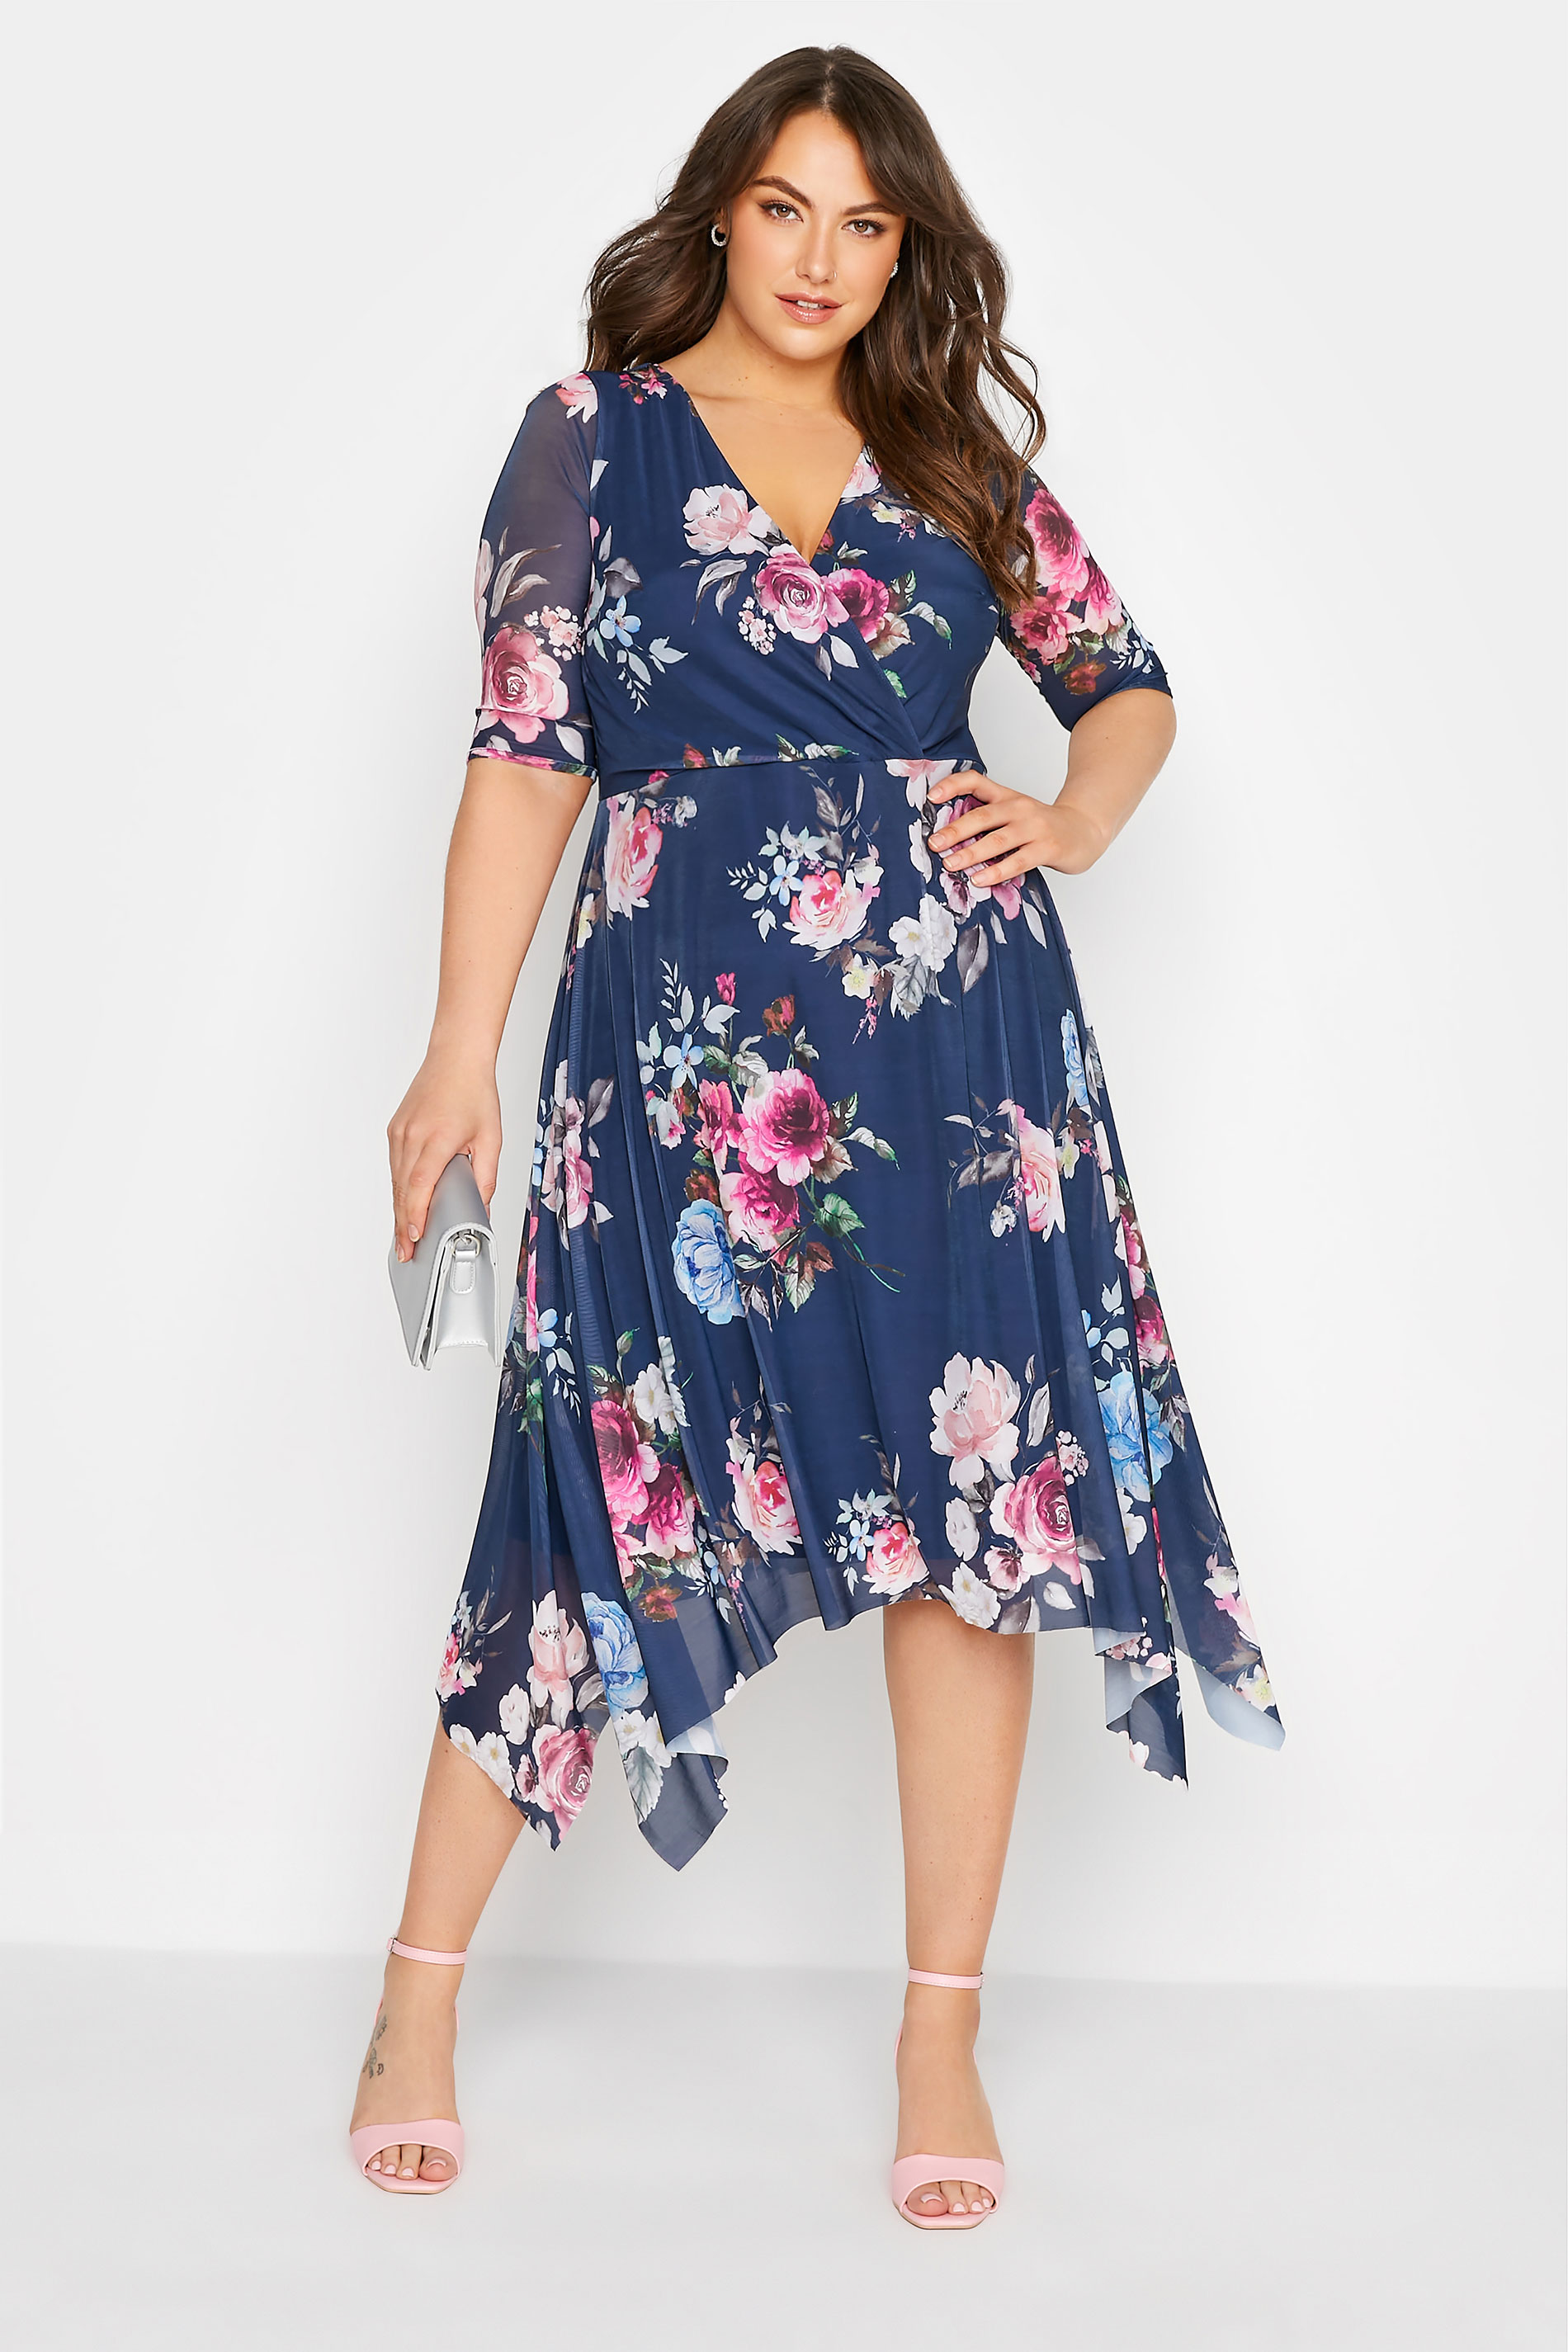 YOURS LONDON Plus Size Navy Blue Floral Print Wrap Dress | Yours Clothing  1